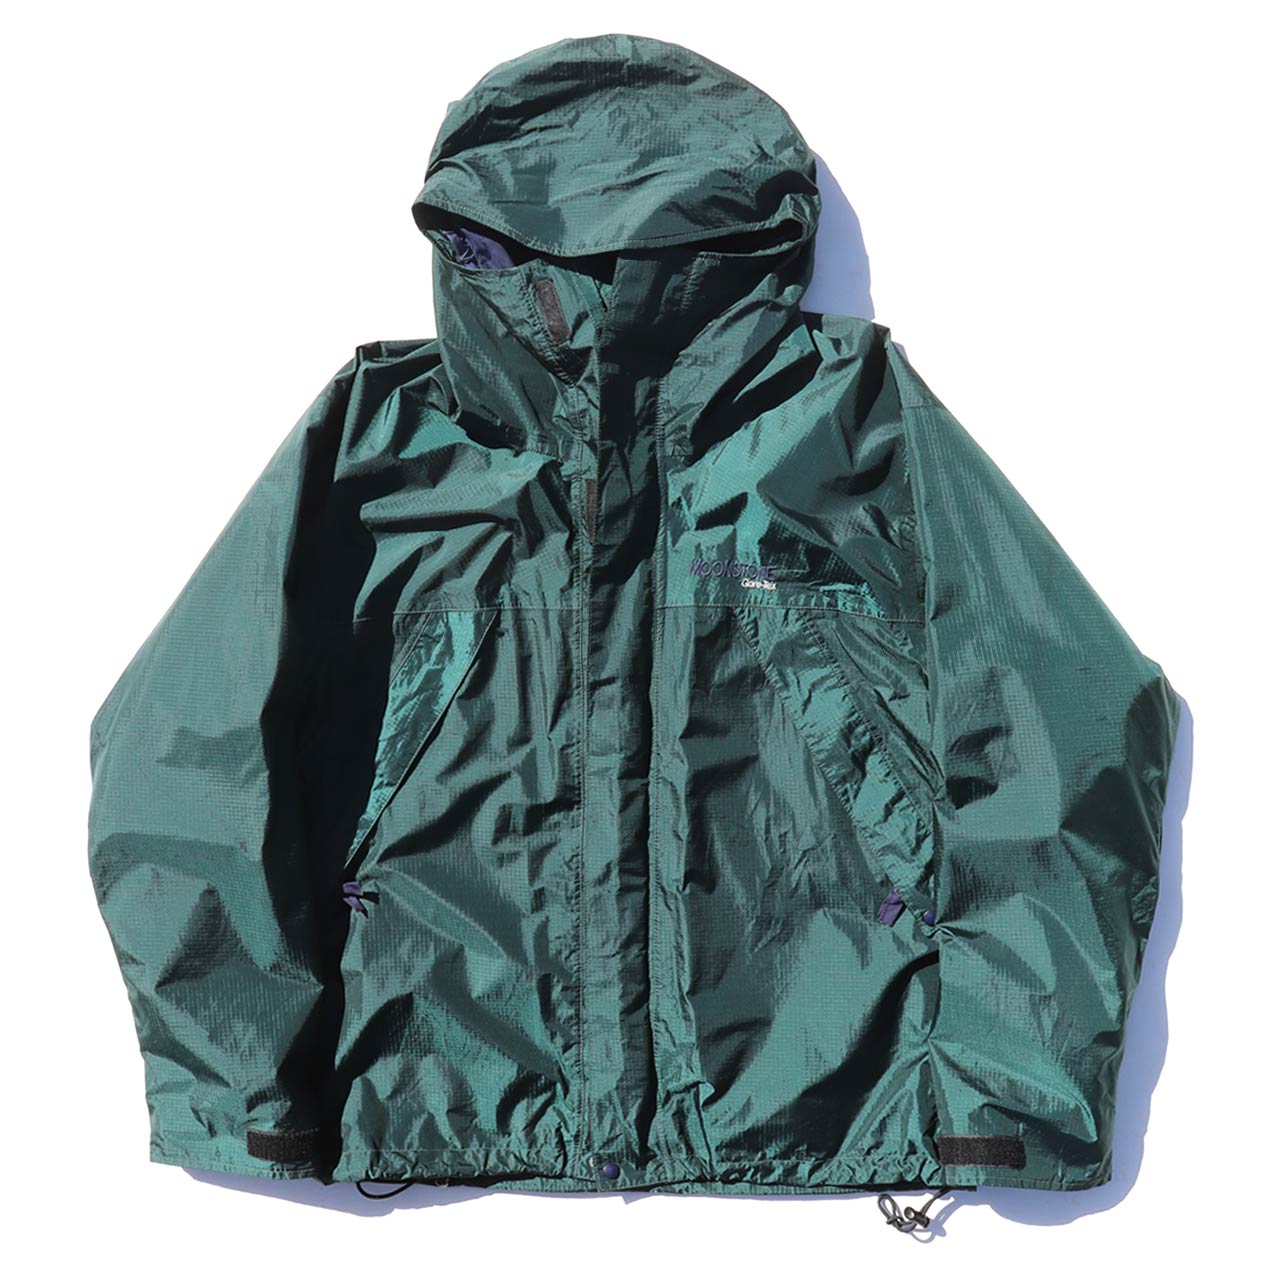 POST JUNK / 90's MOONSTONE Gore-Tex Rip Stop Nylon Jacket Made In 